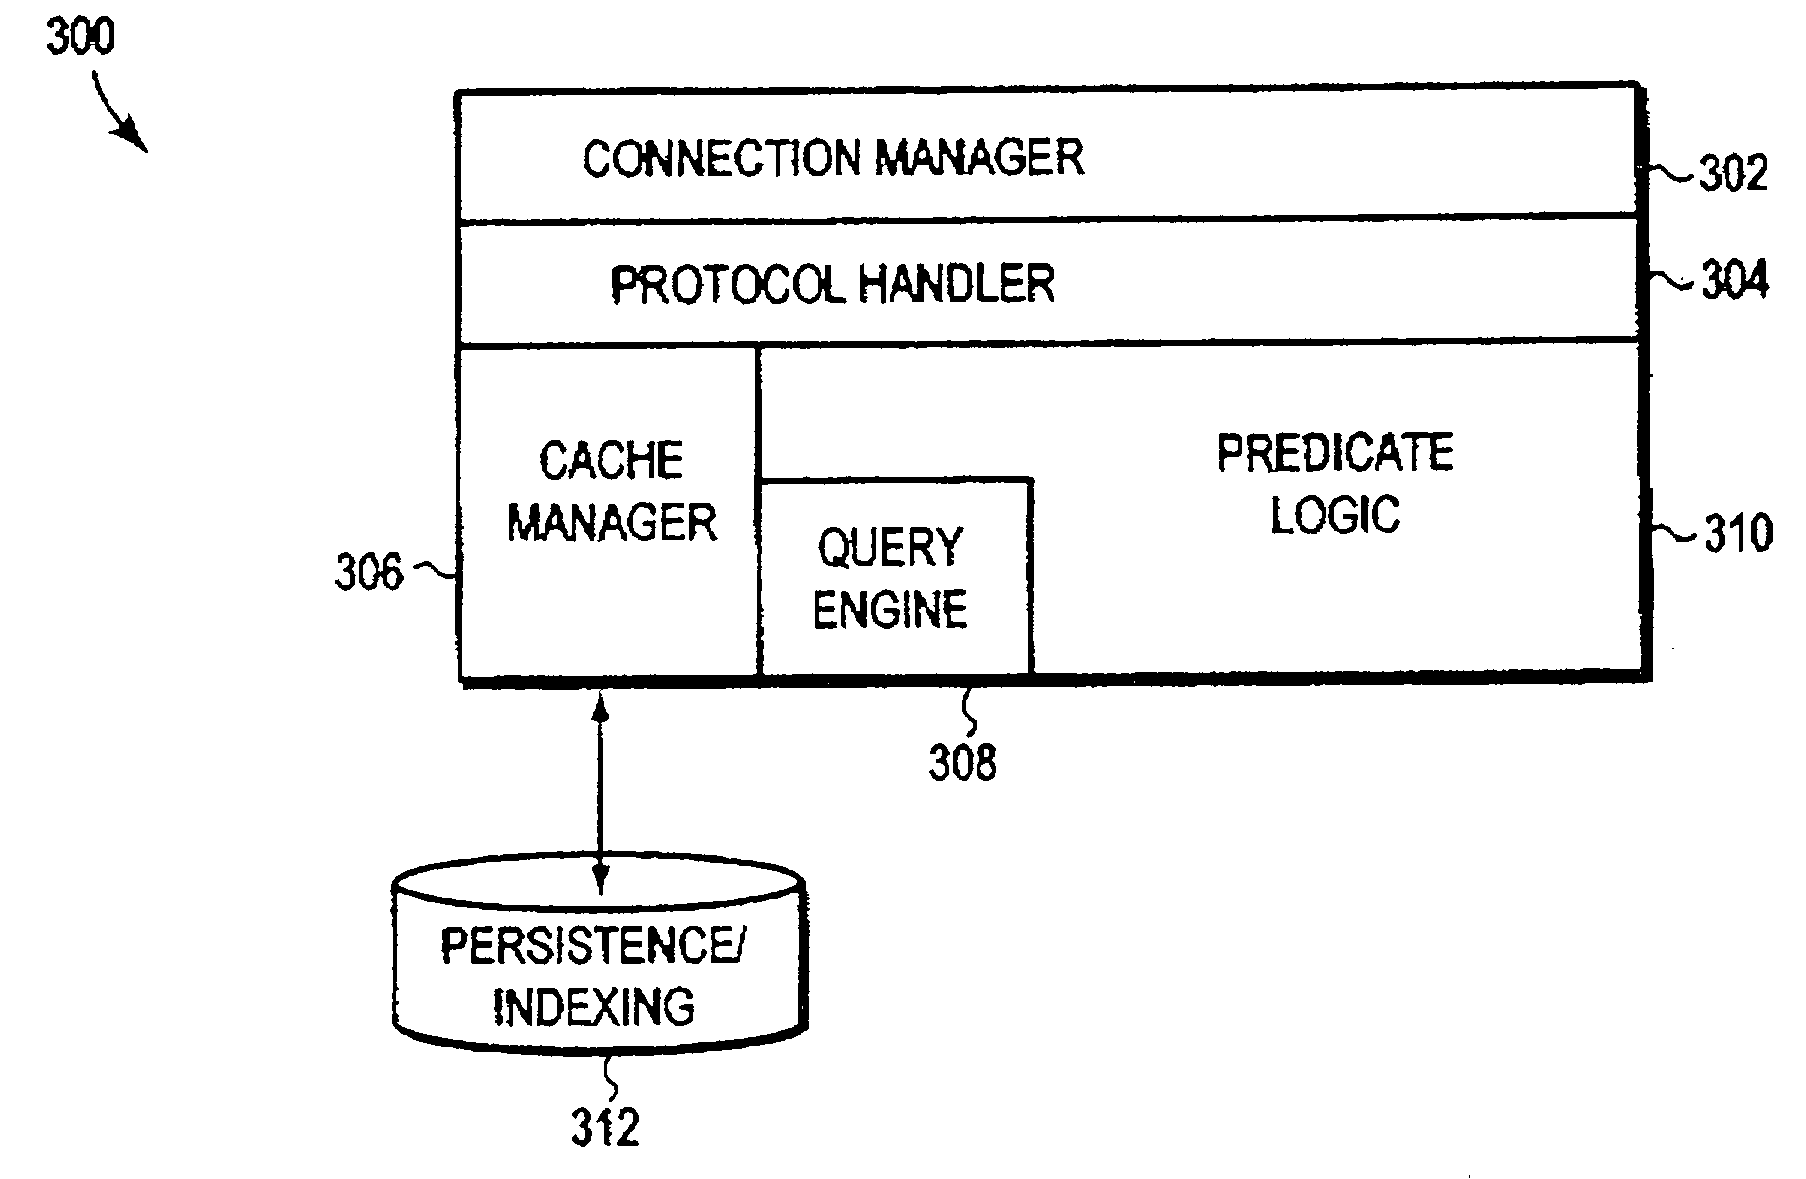 Predicate indexing of data stored in a computer with application to indexing cached data